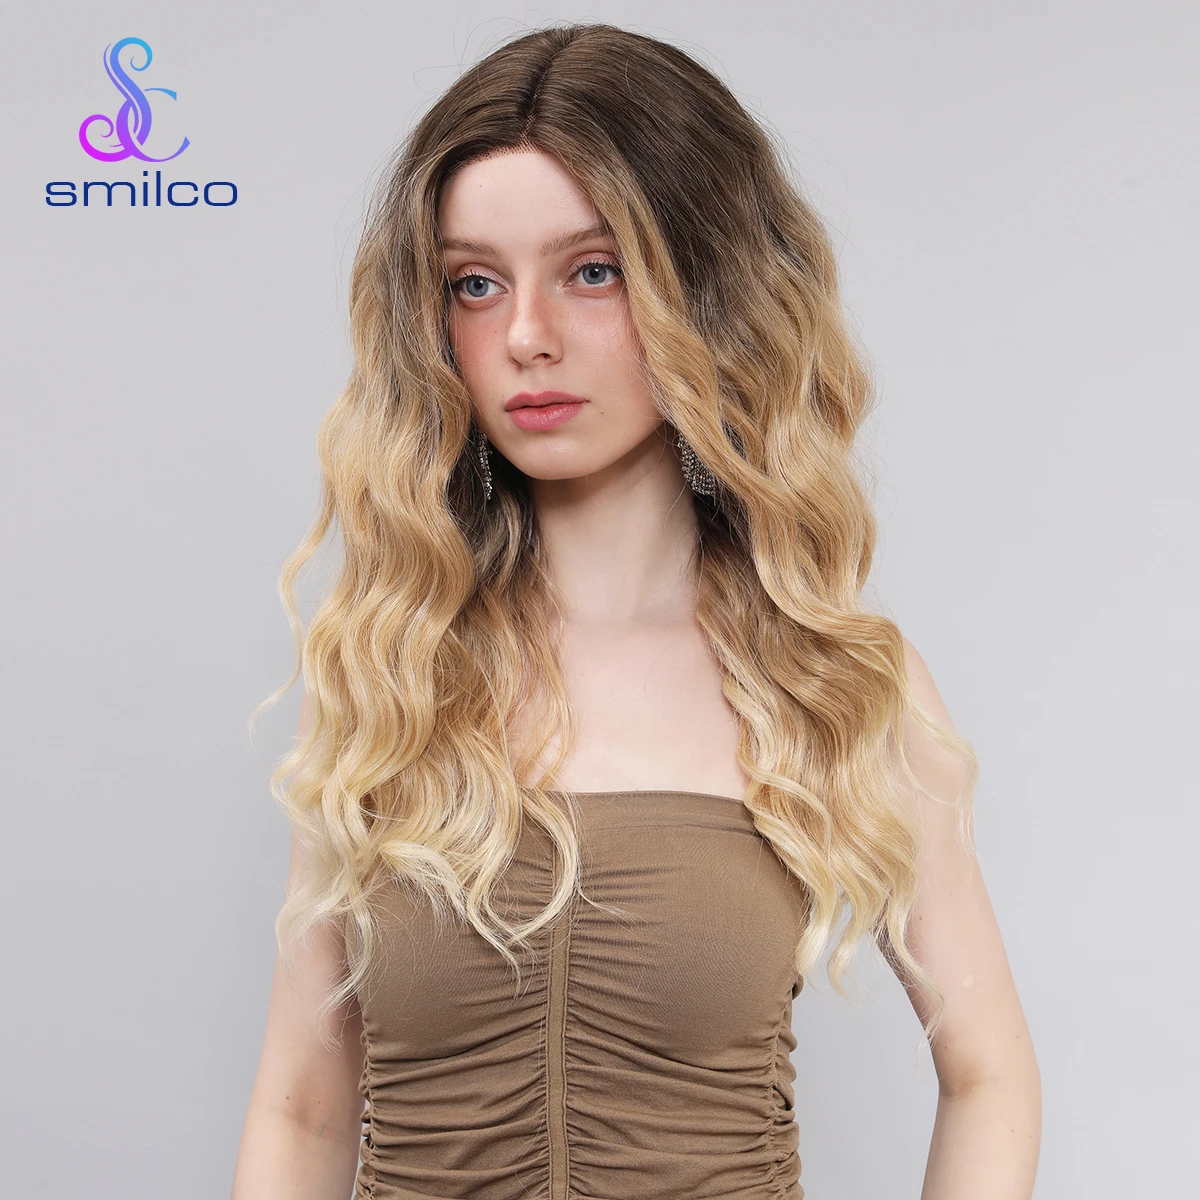 

Smilco Curly Wigs for Women Synthetic Long Wavy Wig Middle Part Heat-resistant Lace Front Wigs for Daily Party, Cosplay Use(Brow